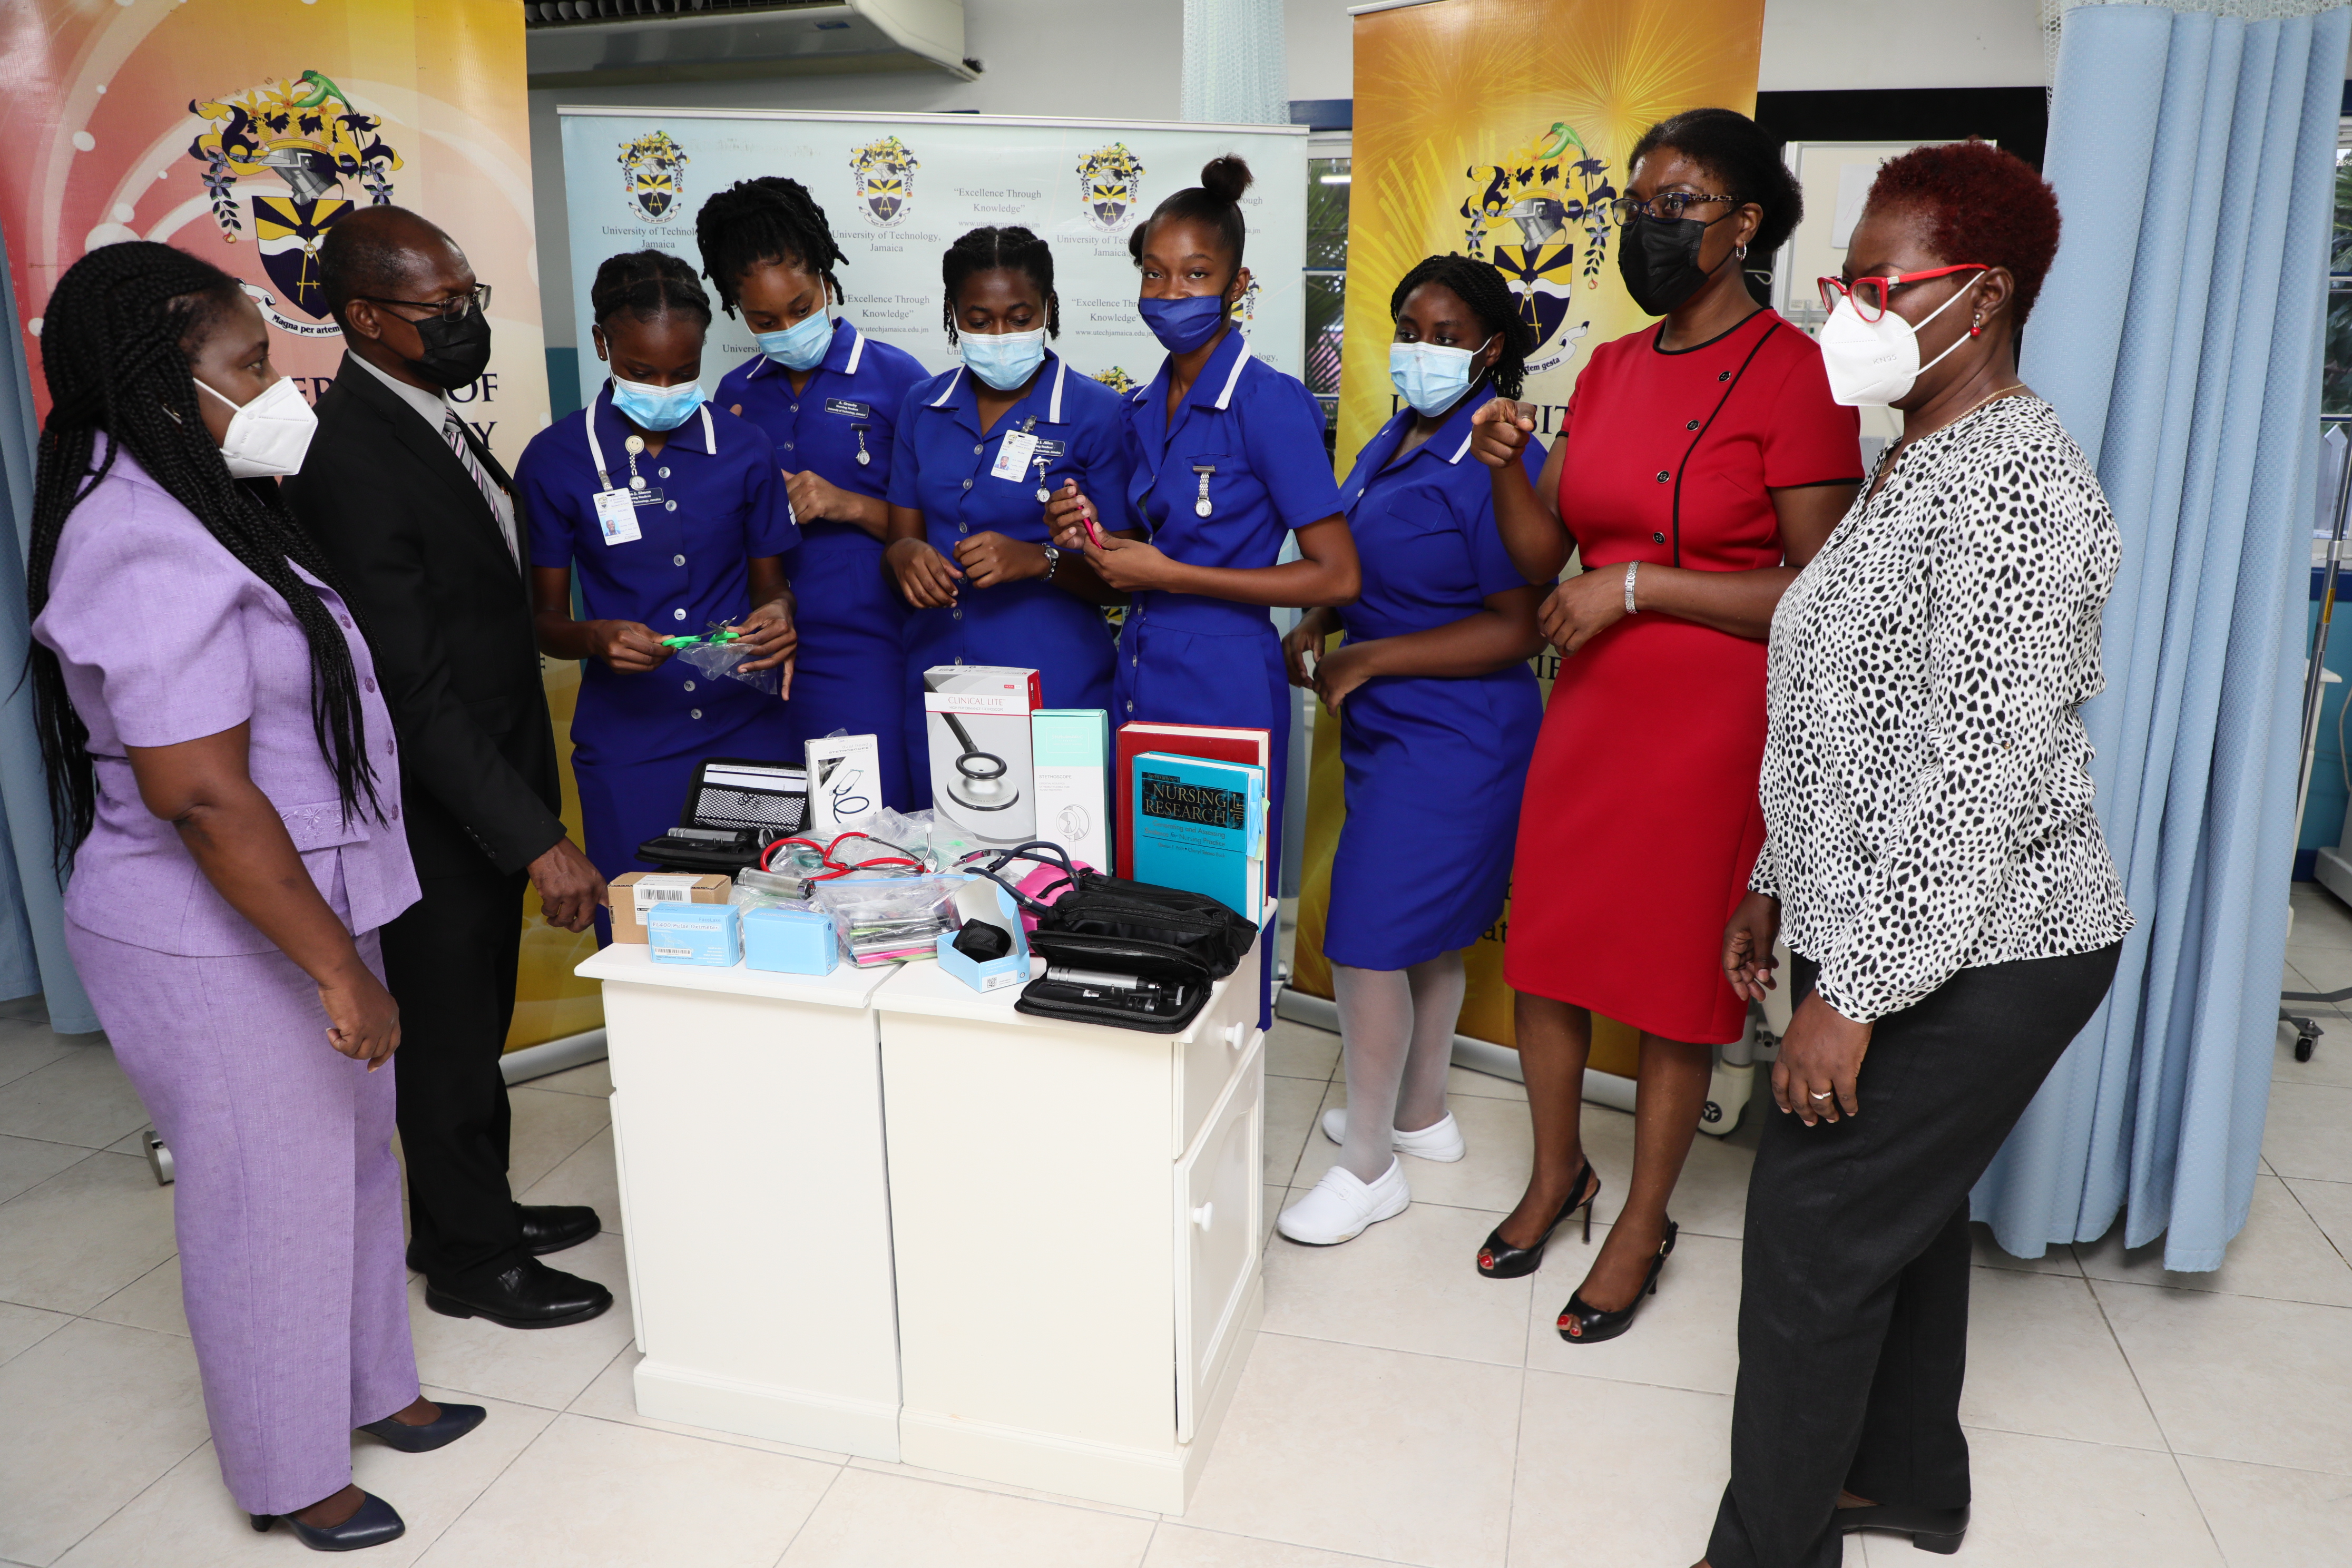 UTech, Jamaica Receives Donation of Medical Supplies and Books from Nursing Practitioners in the USA